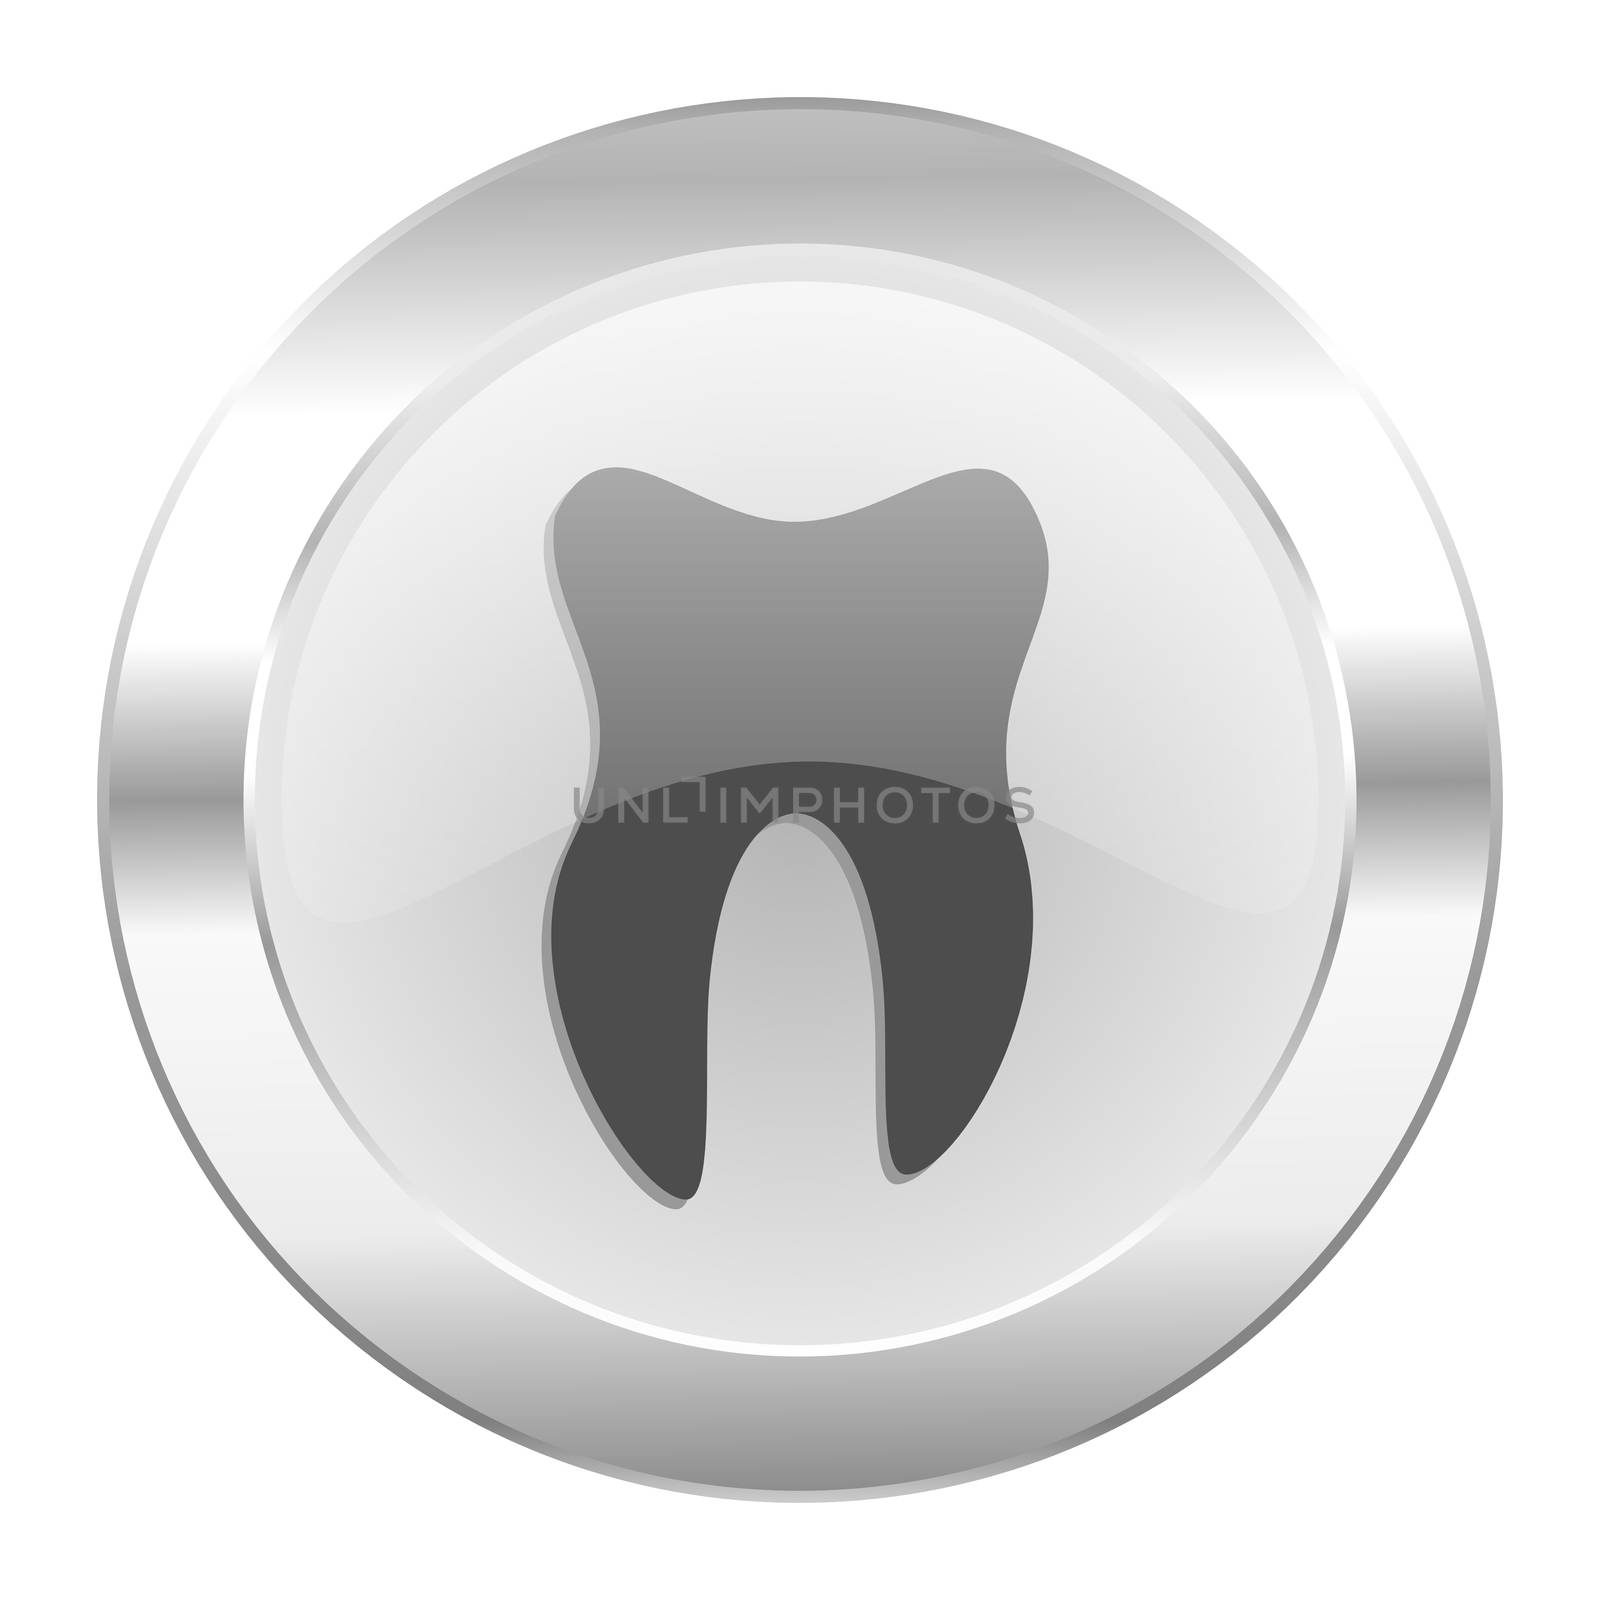 tooth chrome web icon isolated